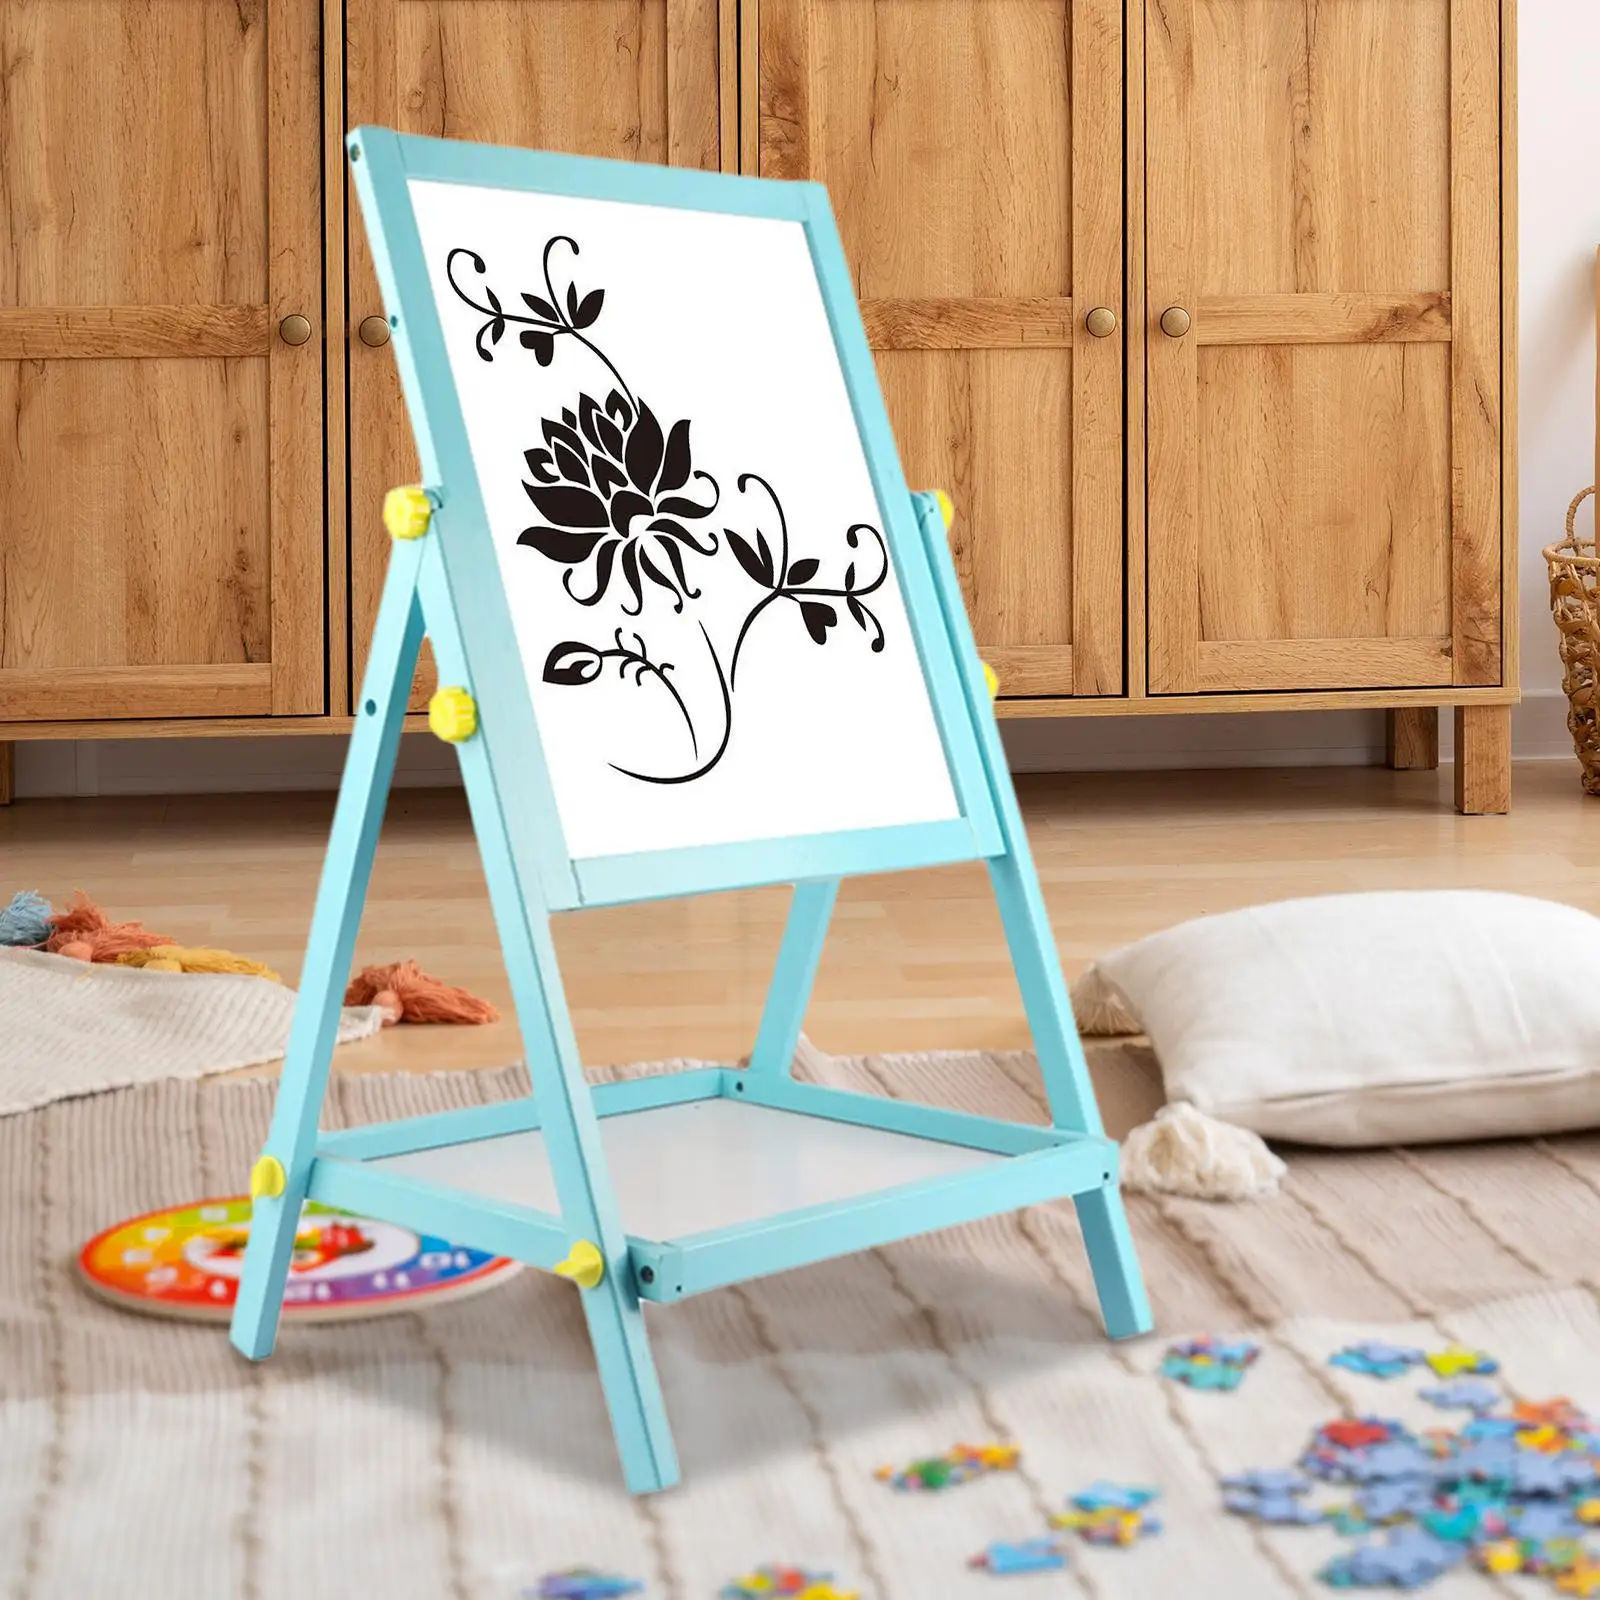 Art Easel Double Sided Whiteboard Chalkboard Painting Accessories Teaching Aid 2 in 1 Easel Double Sided Easel for Kids Children